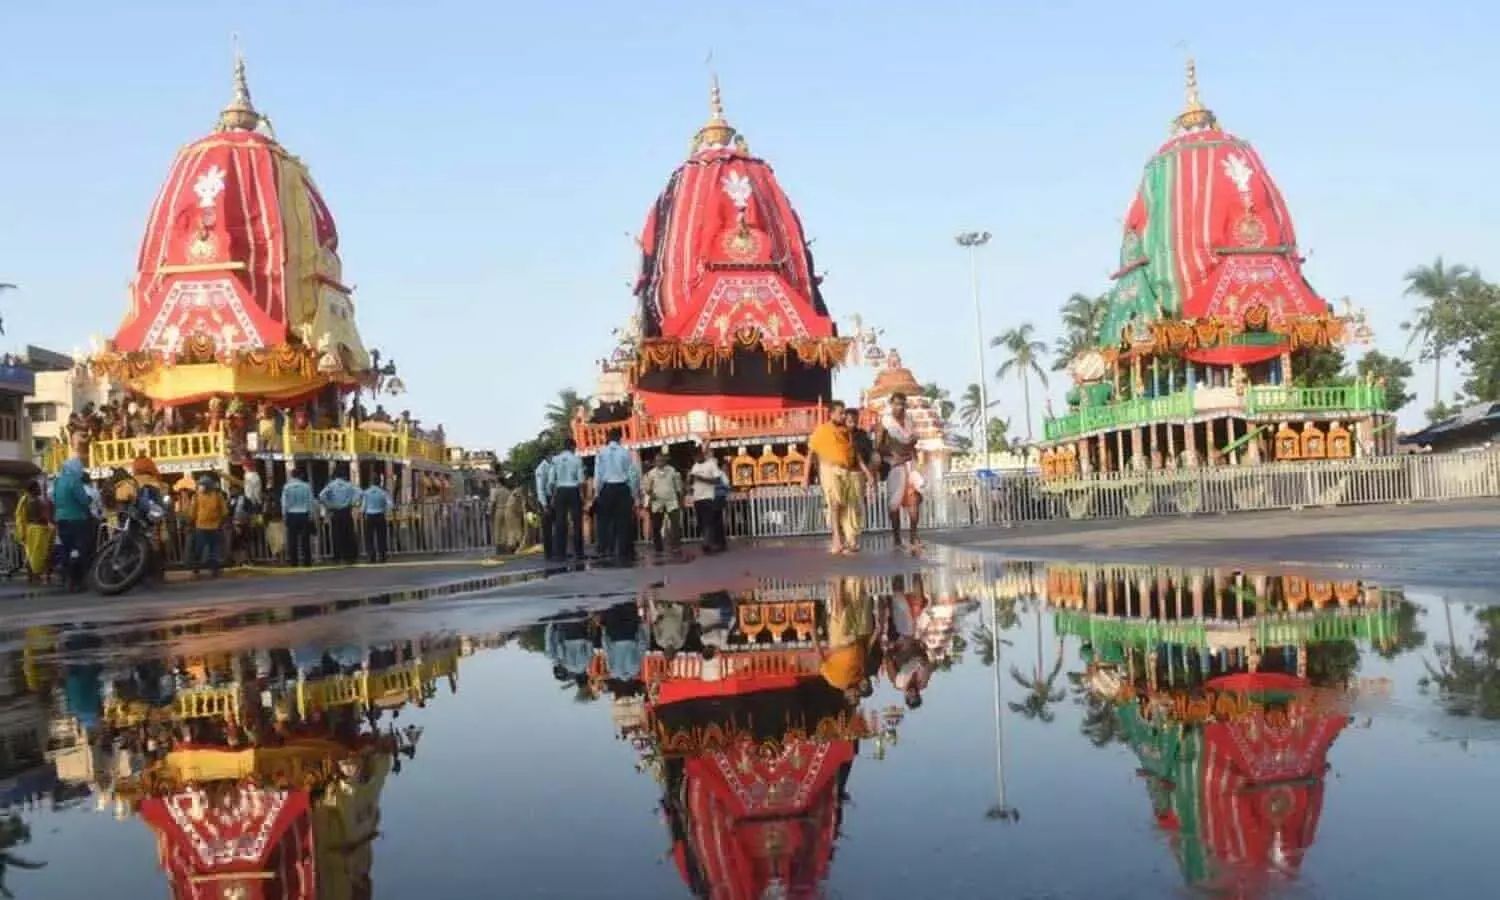 The process of making chariots for the Rath Yatra of Lord Jagannath to be taken out in Puri is almost complete.